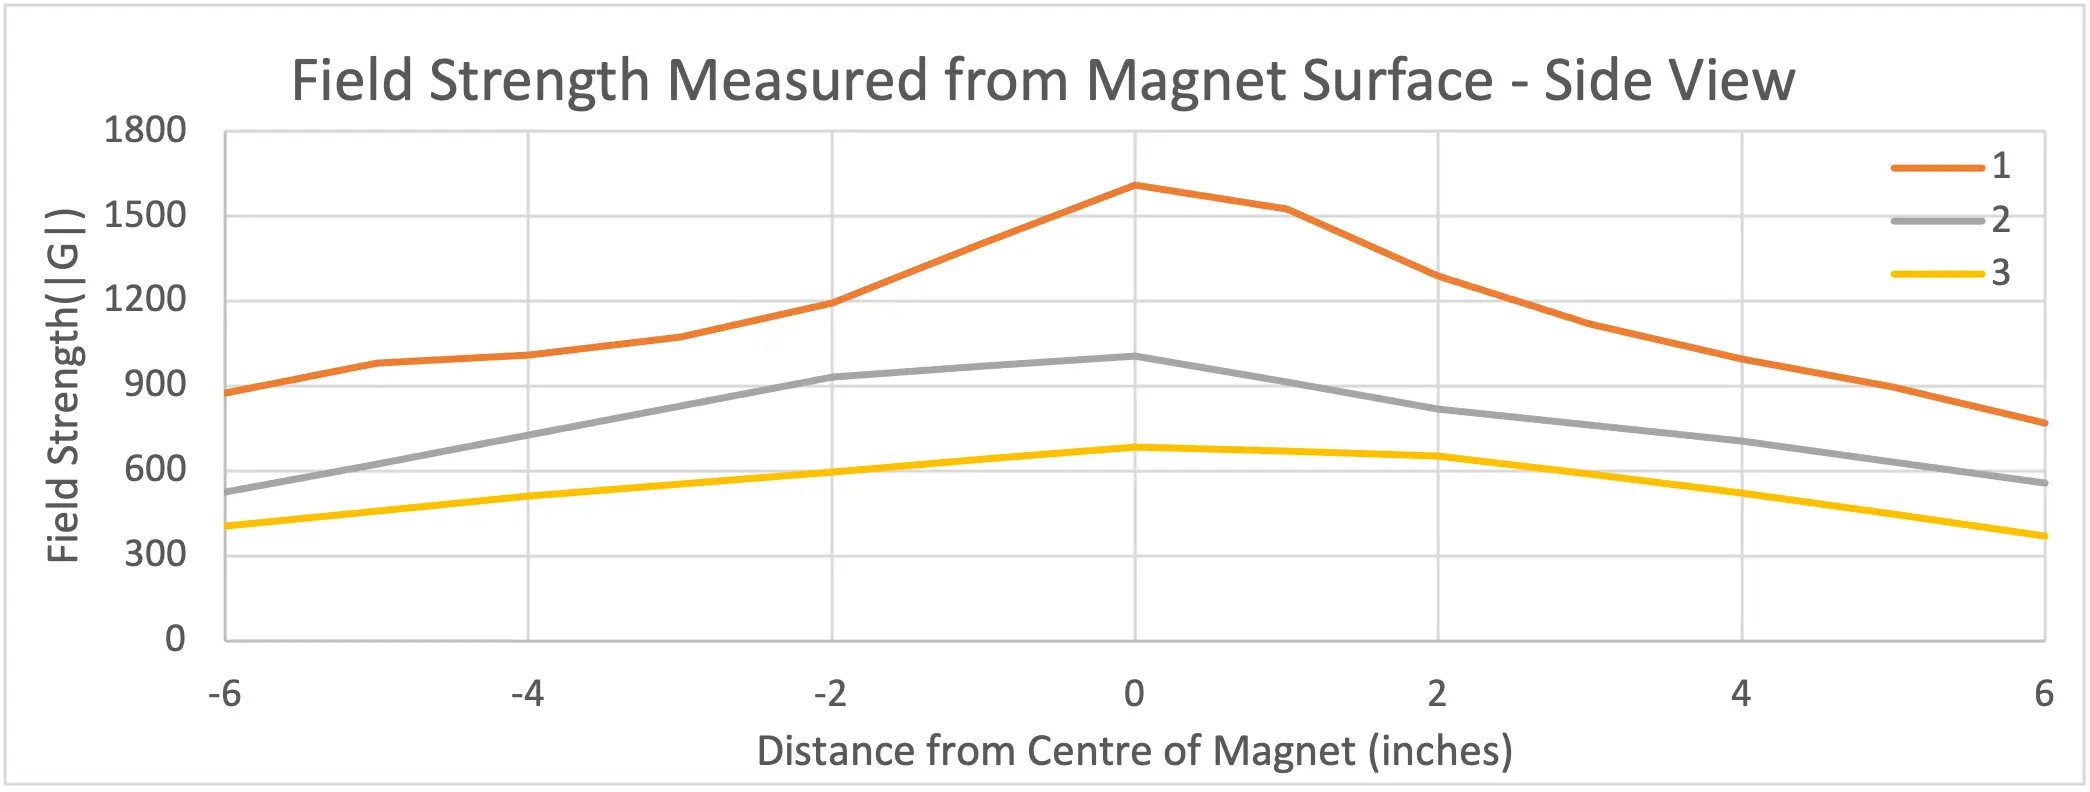 Seeker - Field Strength Measured from Magnet Surface - Side View